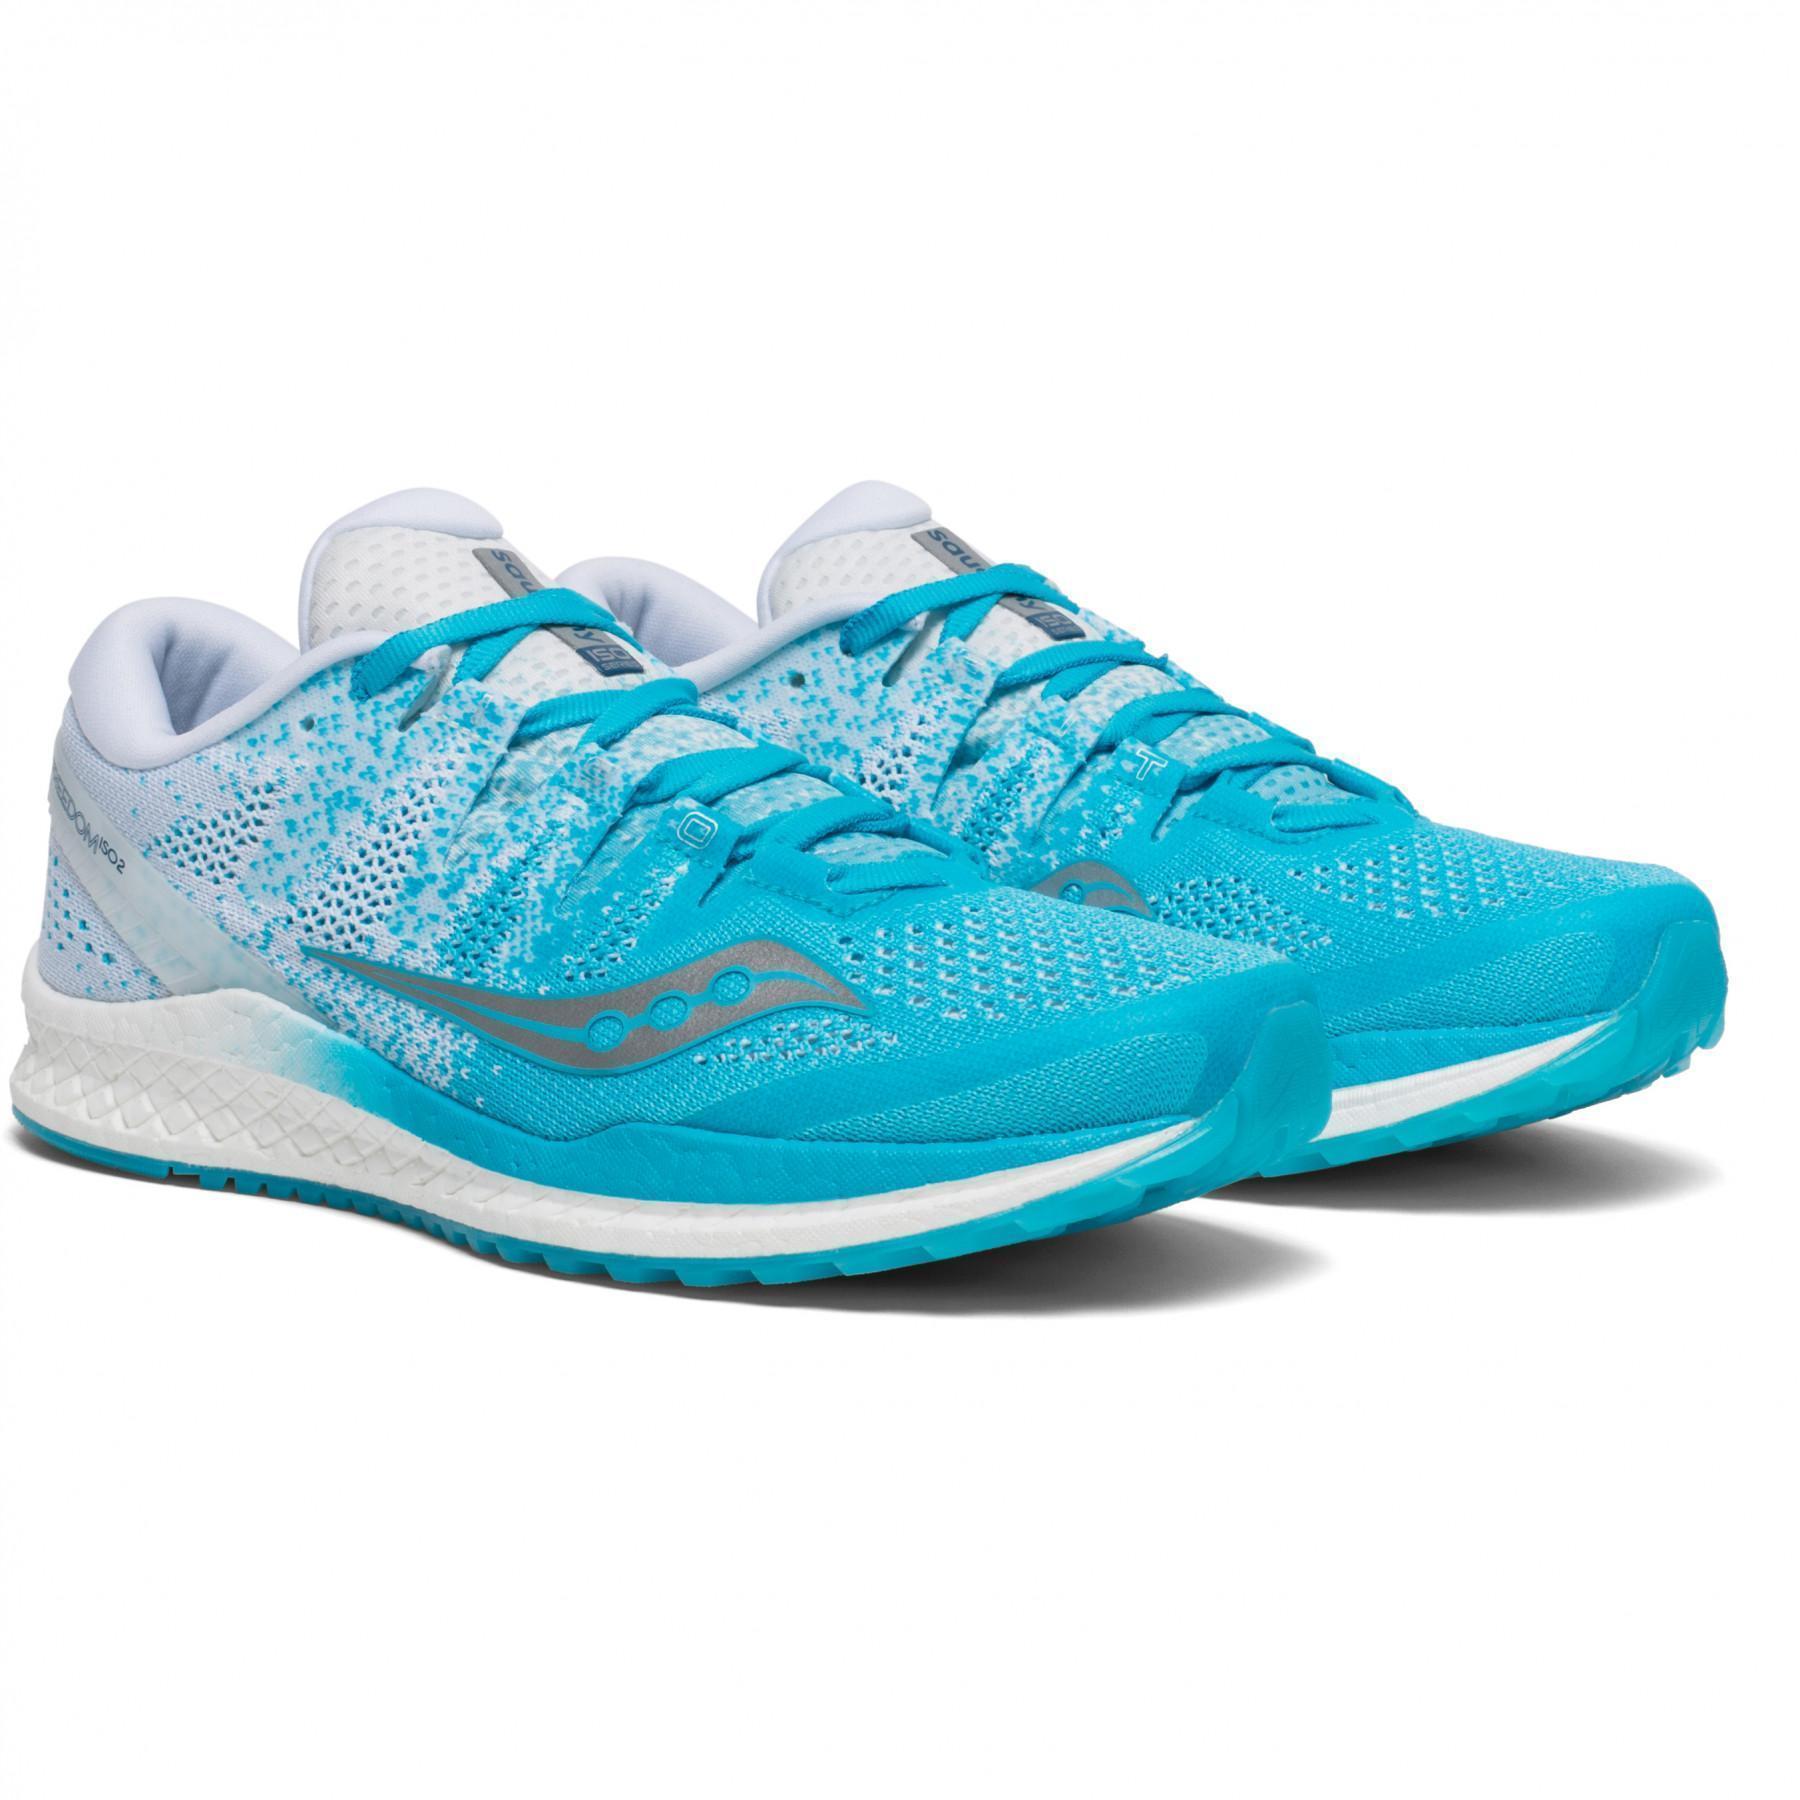 Chaussures femme Saucony Freedom ISO 2